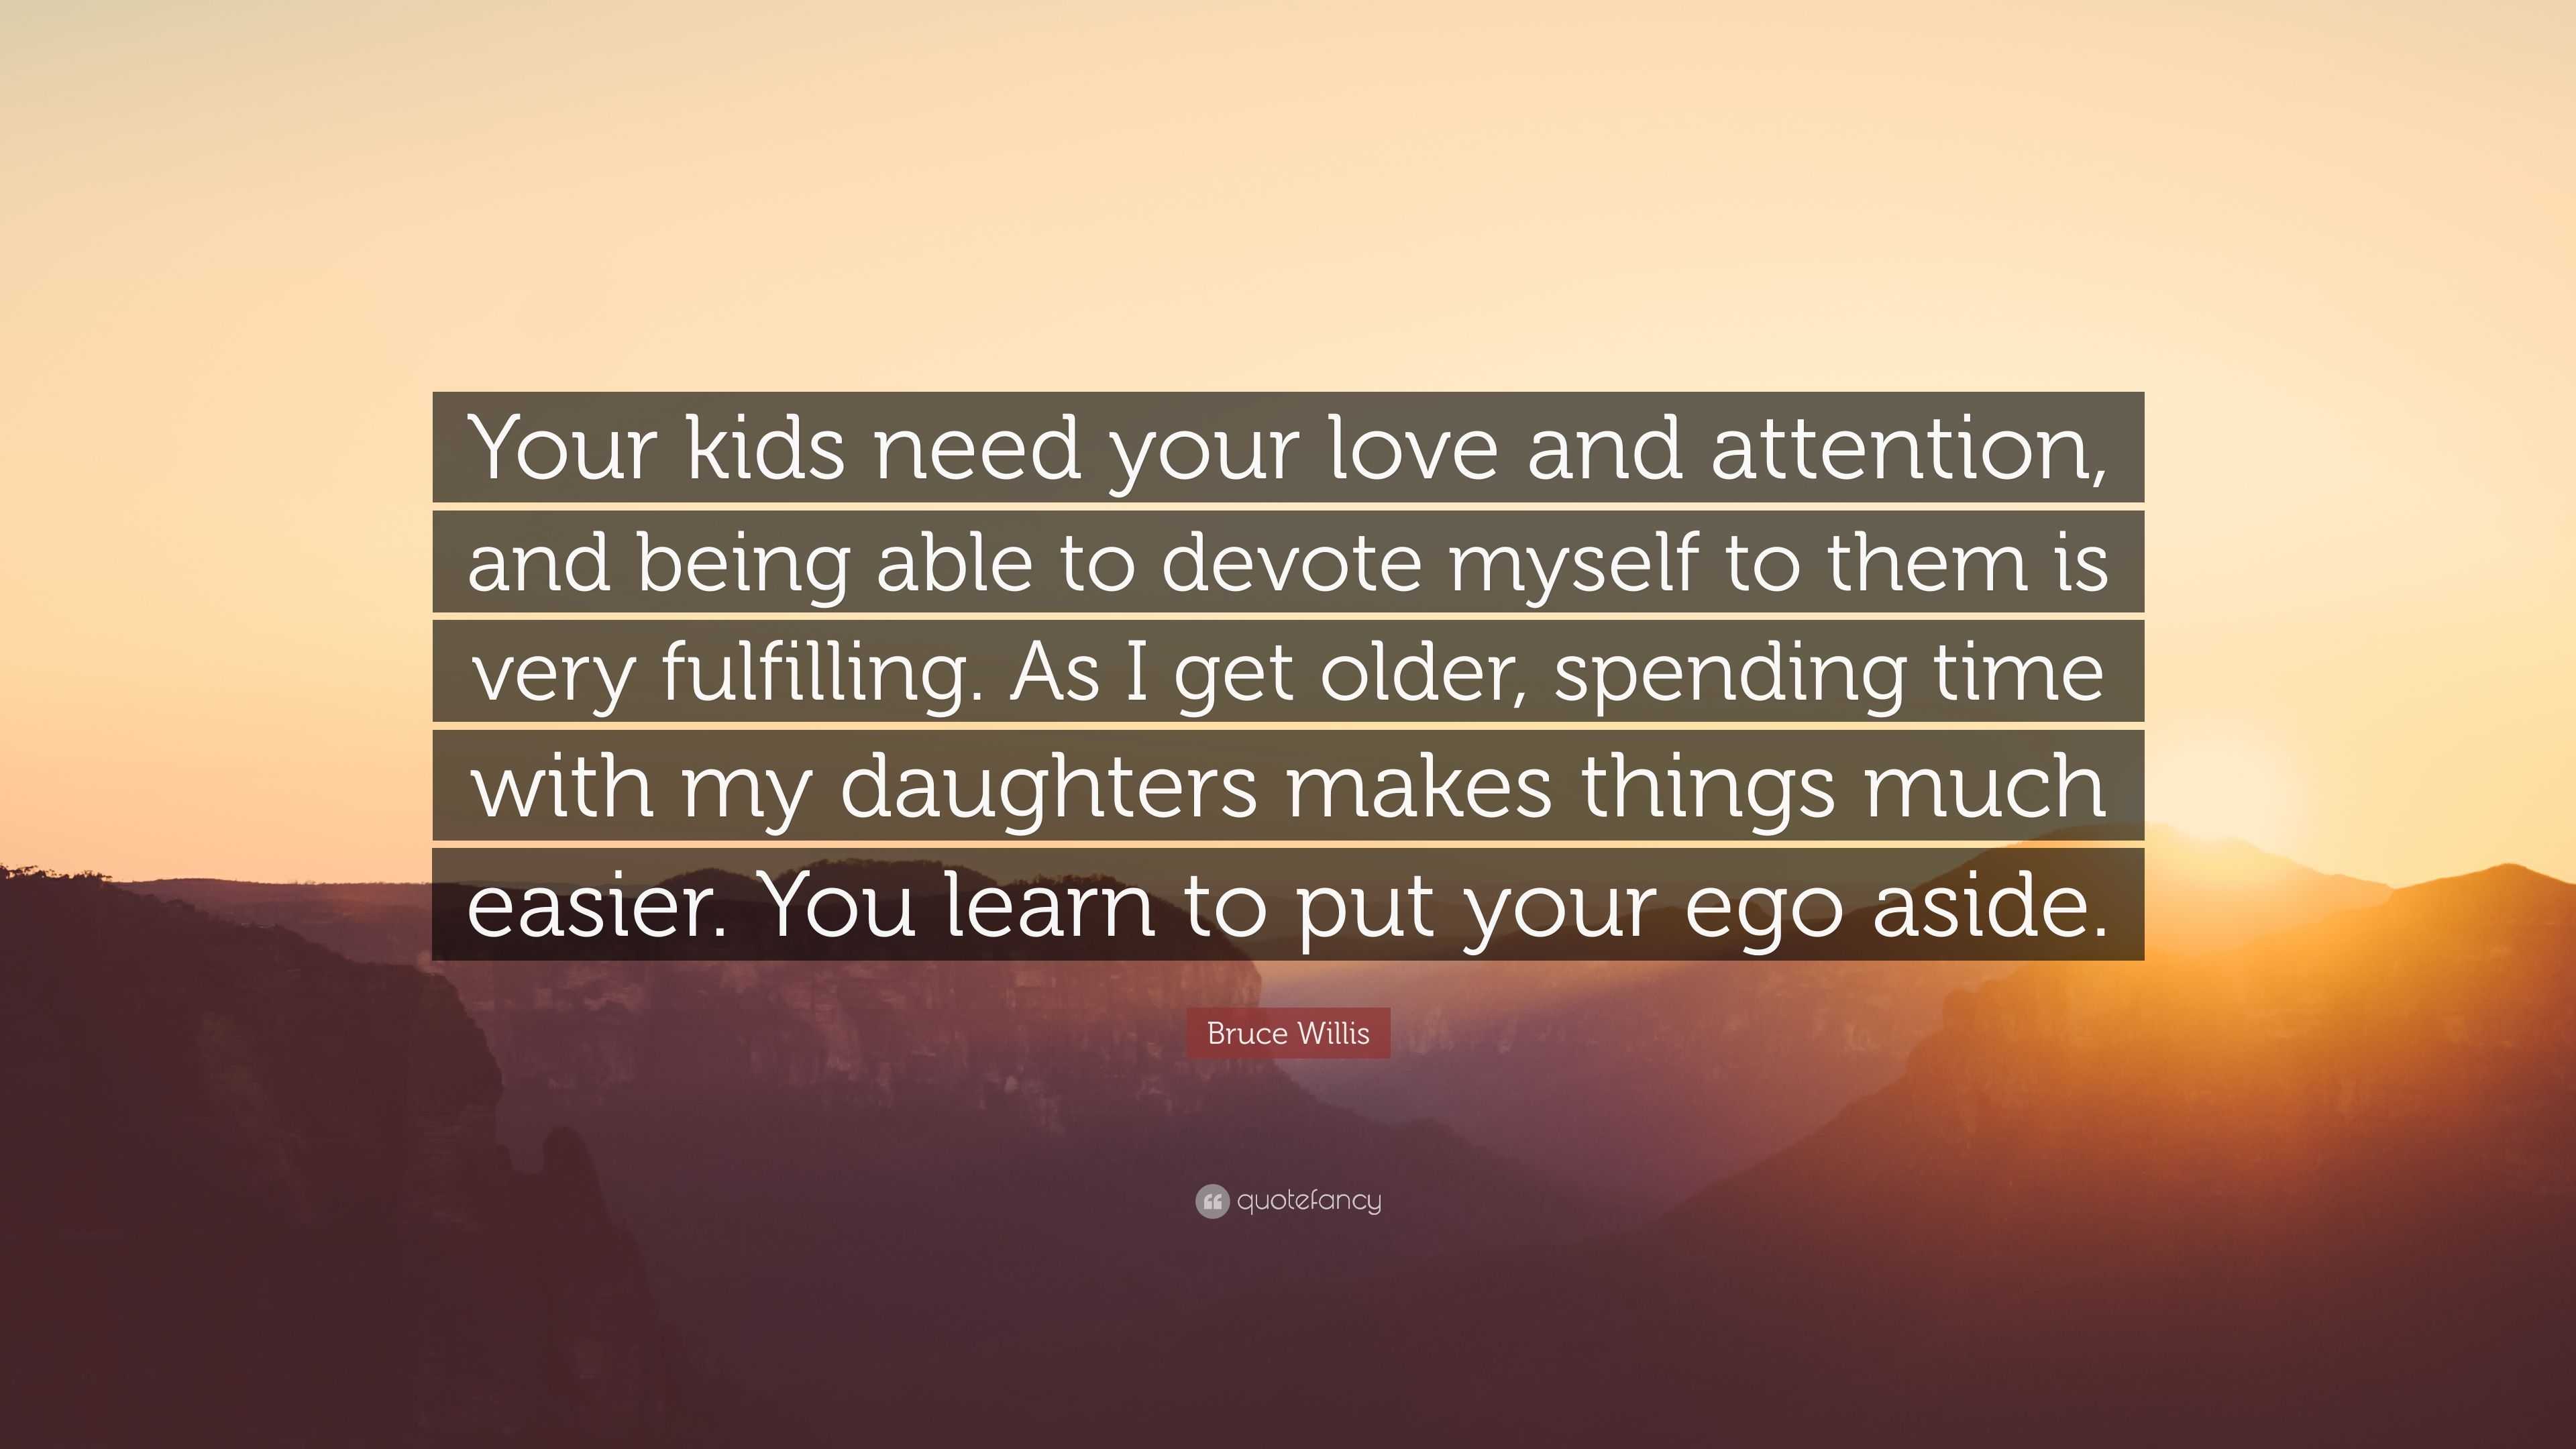 Bruce Willis Quote “Your kids need your love and attention and being able